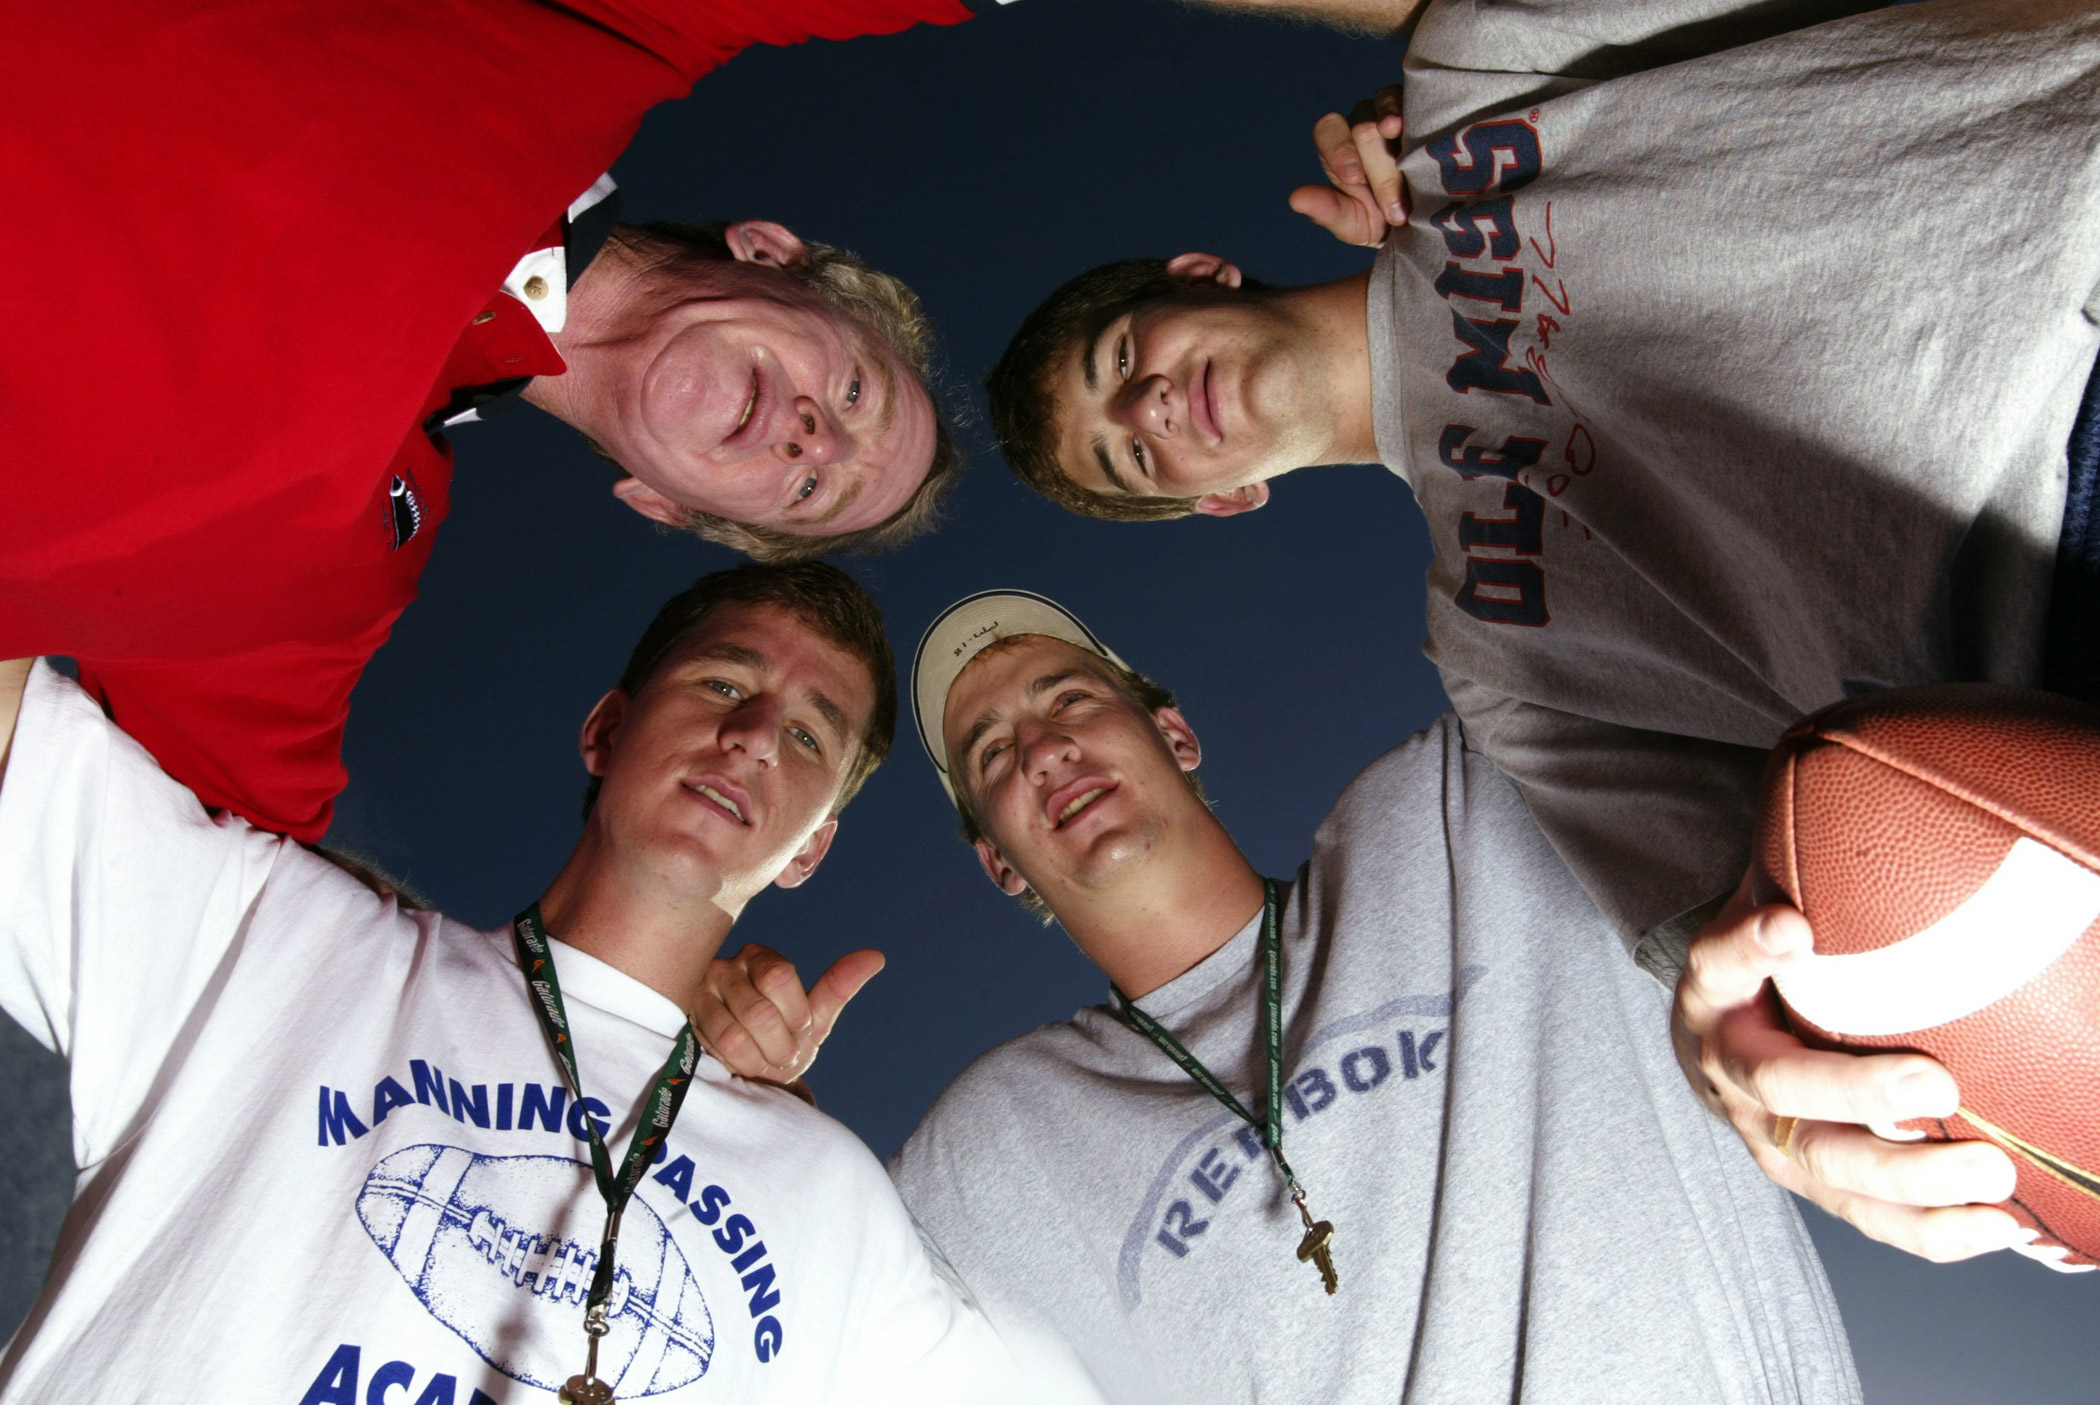 The Mannings pose for a portrait at the Manning Passing Academy in 2003. Clockwise from top left are Archie, Eli, Peyton and Cooper.